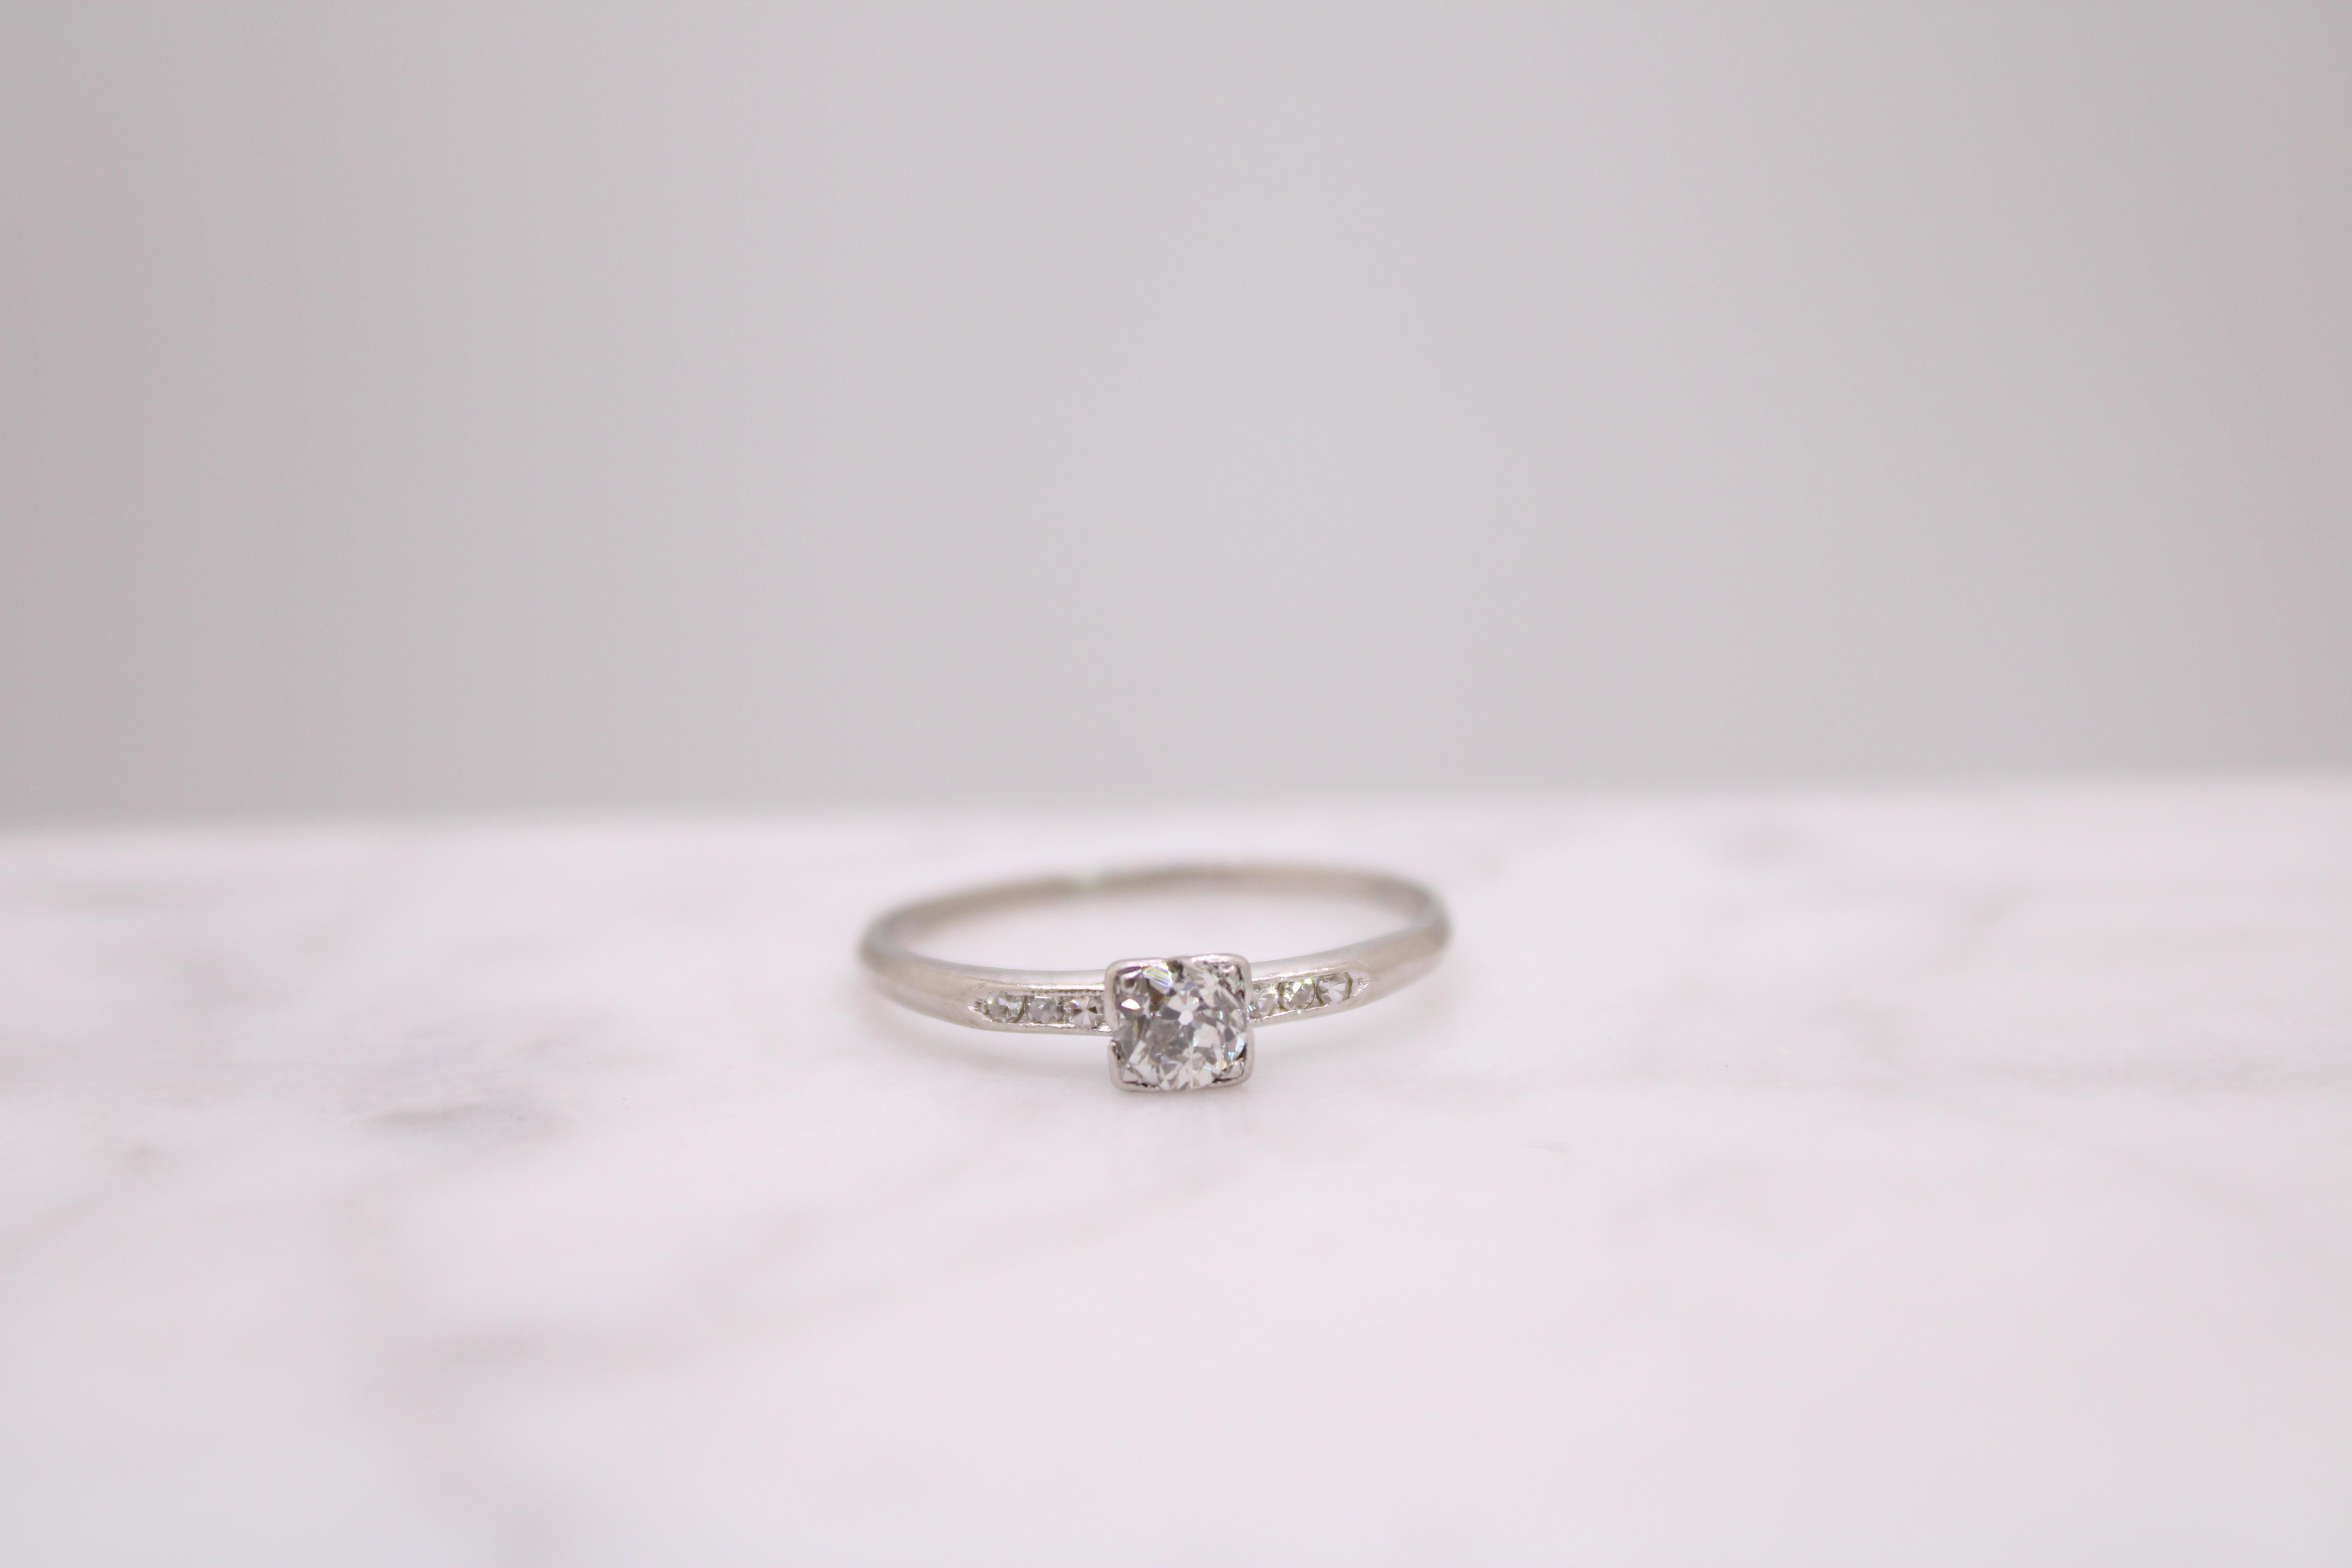 Small but mighty. This delicate ring offers mega-watt sparkle from every angle. 
But her magnificence doesn't stop there. At first glance, one would assume it is a classic mid-century engagement ring but on further inspection, it reveals a much